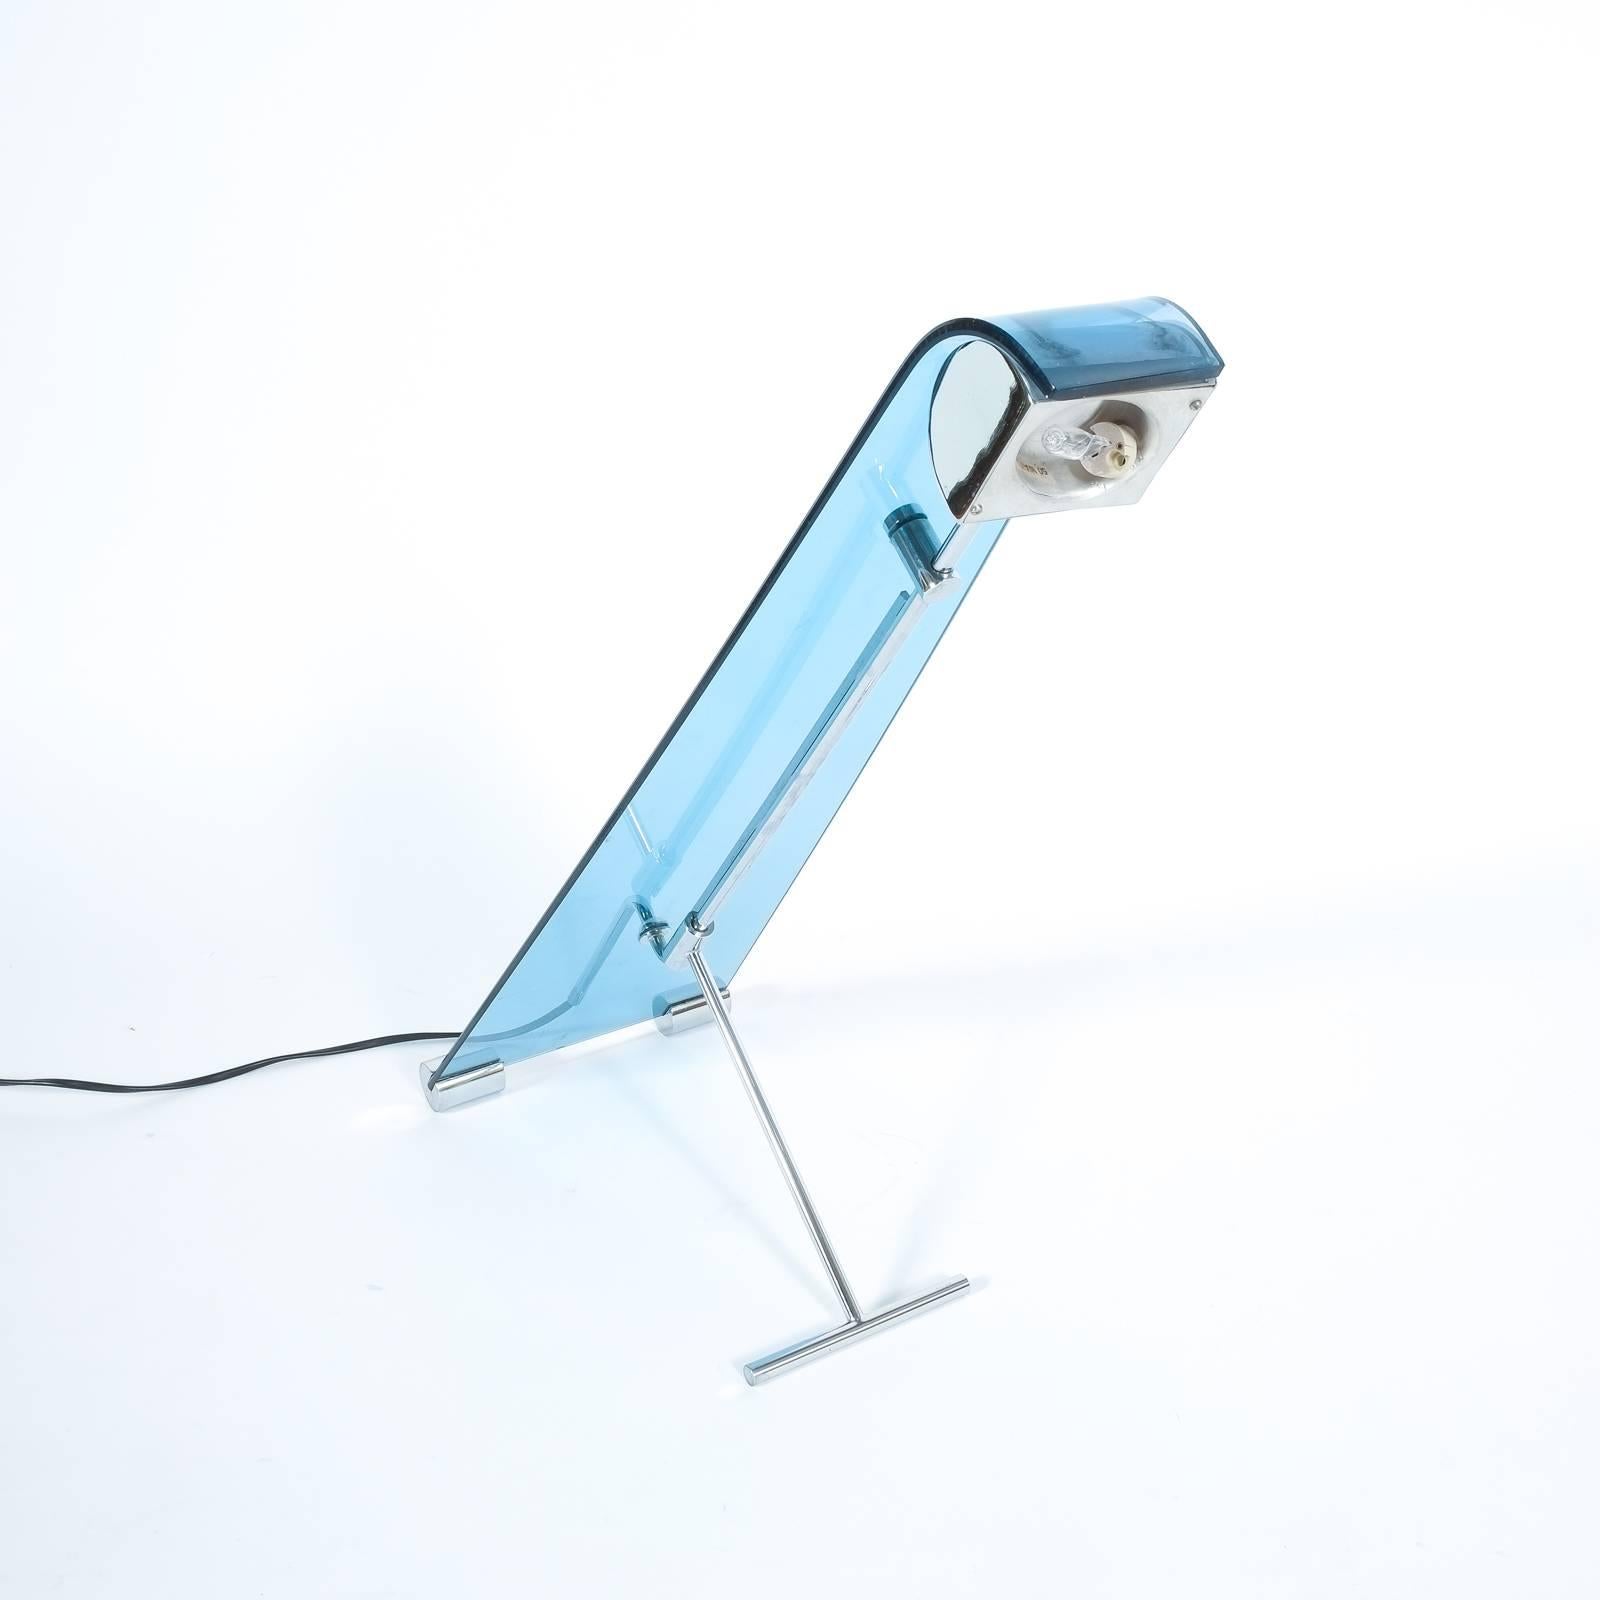 Delicate perspex table lamp, Italy, circa 1980 featuring a bended blue Lucite slab with chromed metal hardware. It's adjustable in height and in very good condition. One halogen bulb with 50W max.